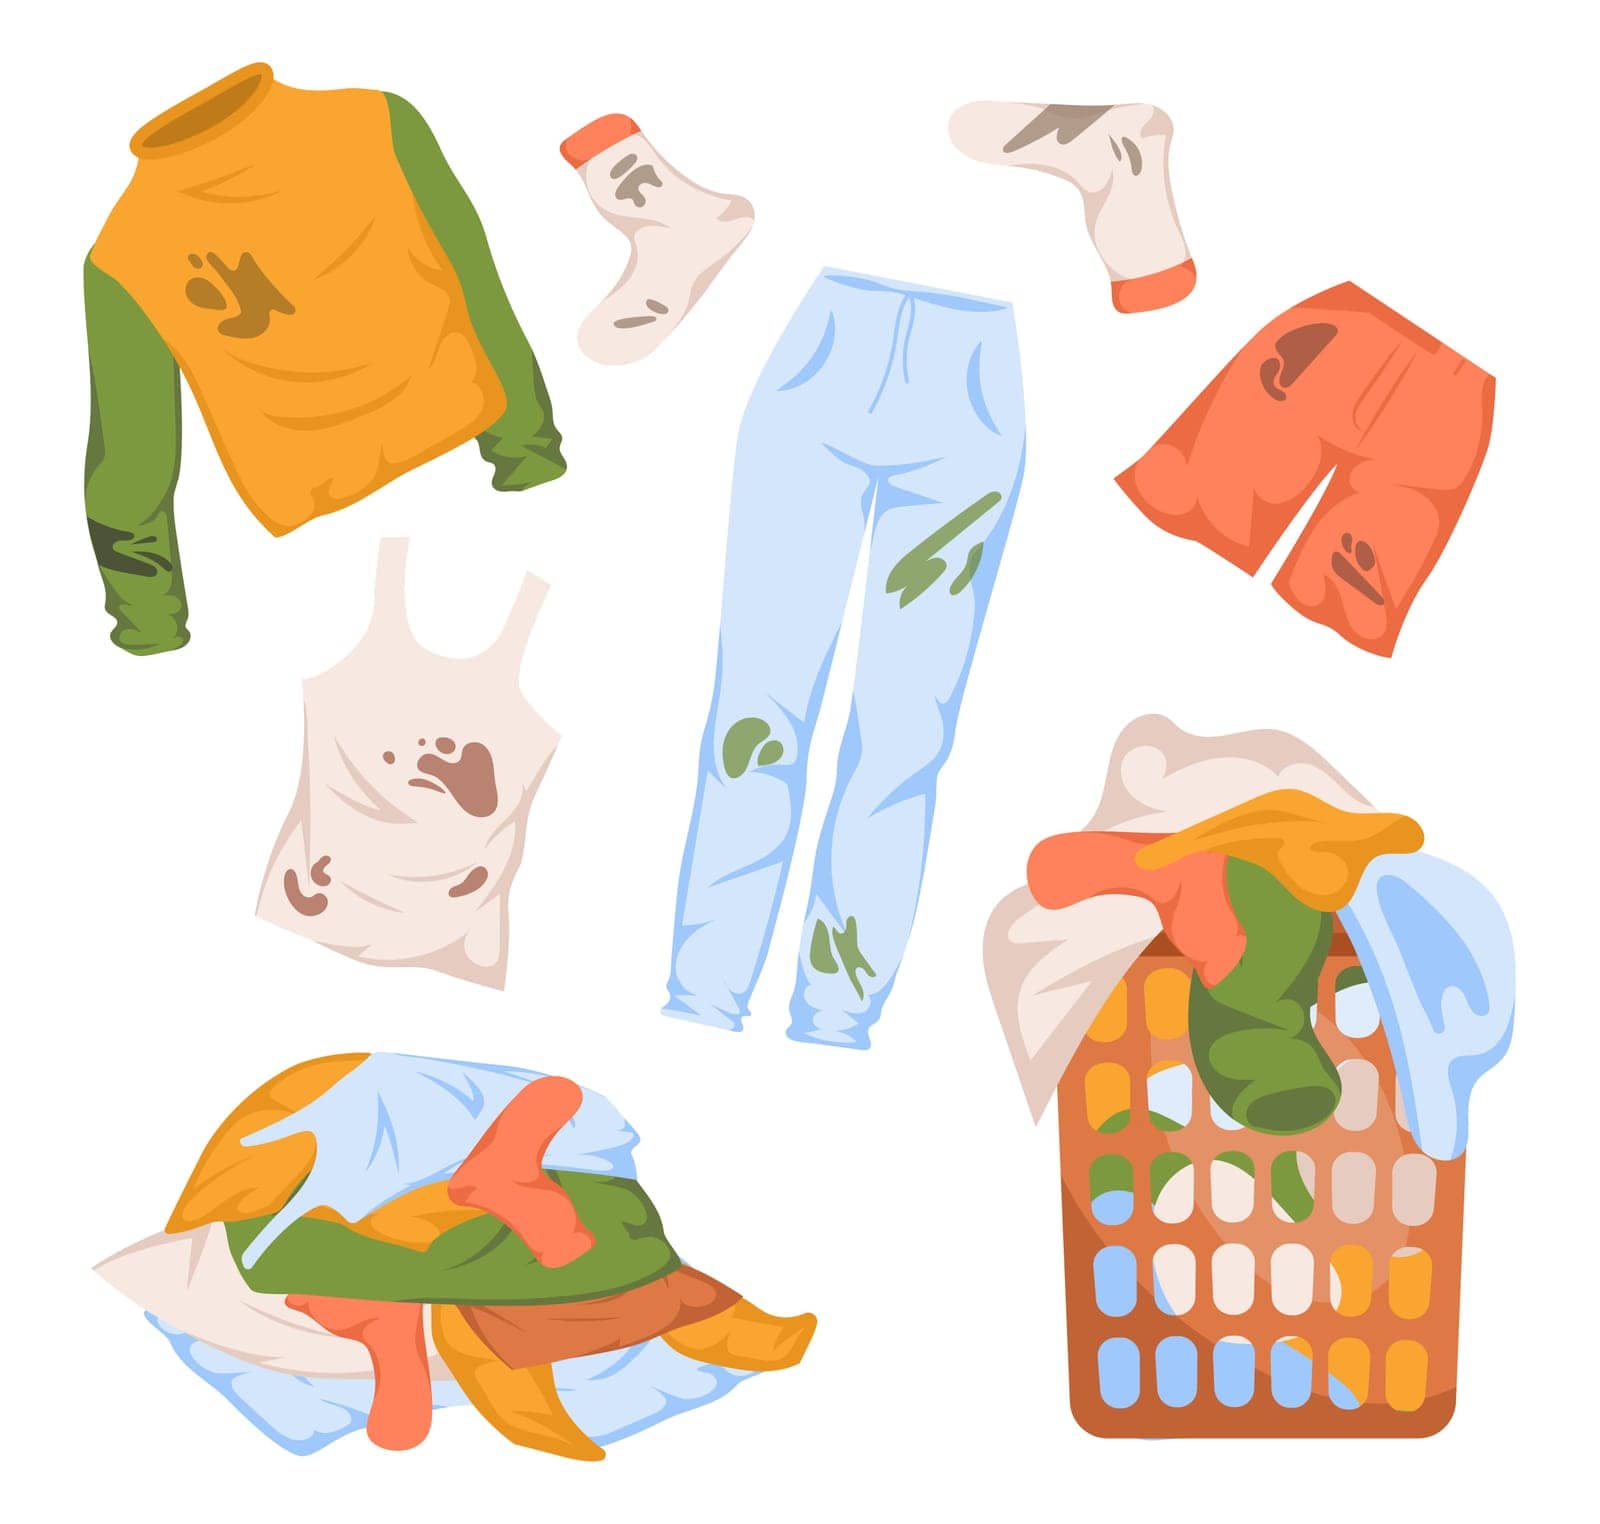 Piles of clean and dirty clothes vector illustration set by pchvector